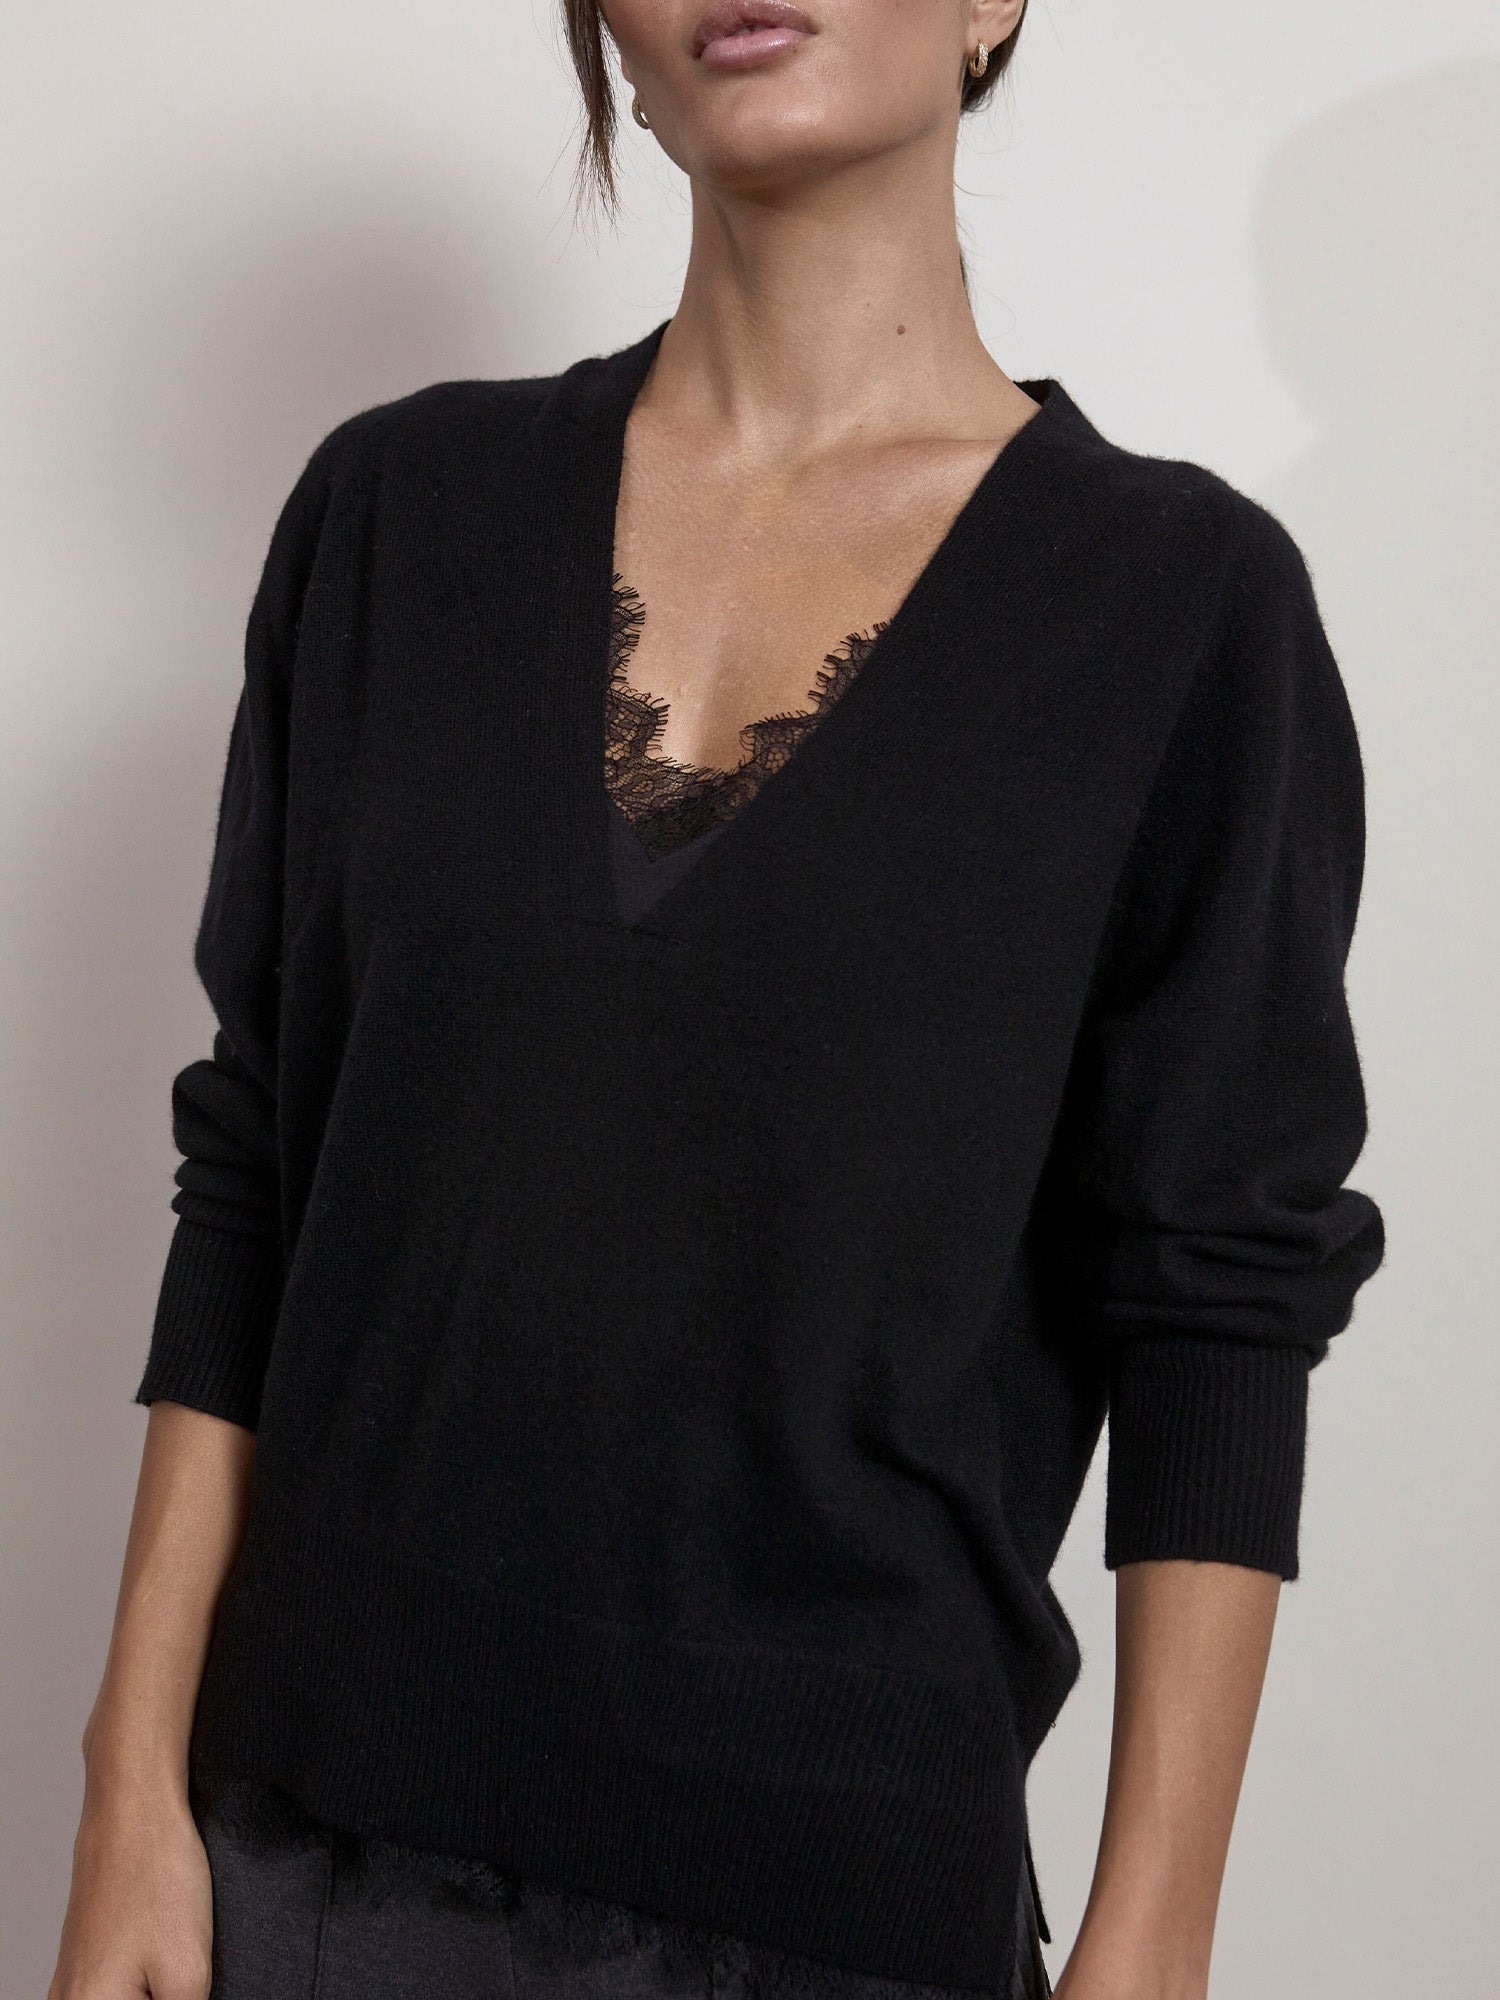 Black lace layered v-neck sweater front view